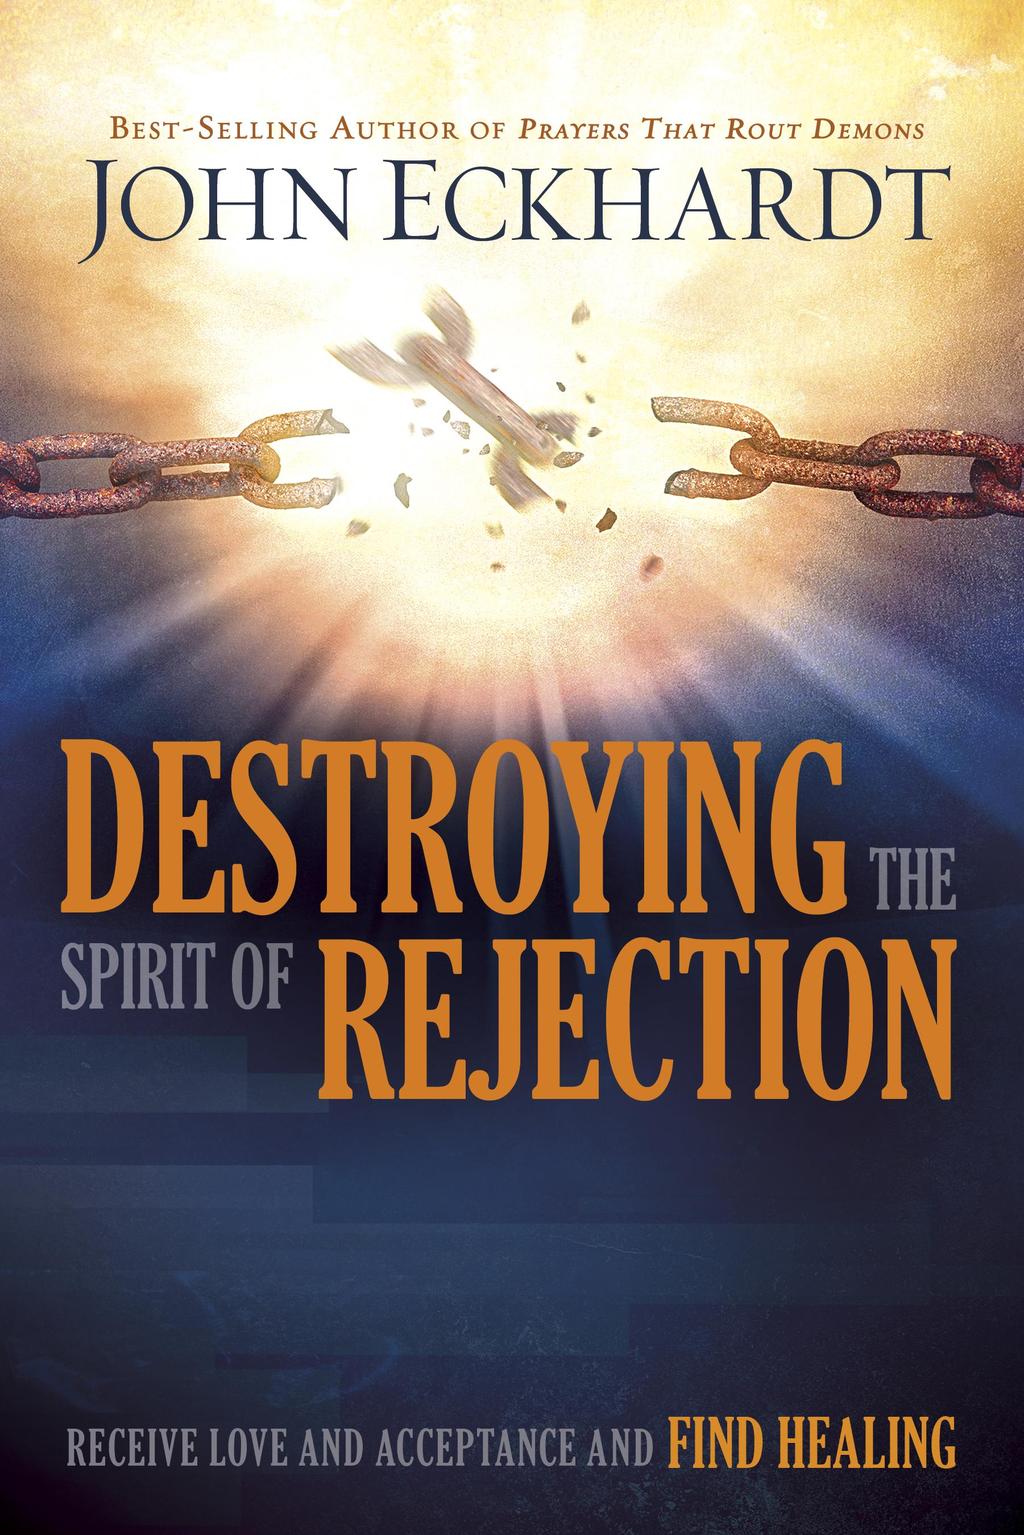 the RiGHt way to respond TO RejeCtion God s rejection comes as a result of His holiness and righteousness. God will never reject you if you come to Him. He will in no way cast you out.